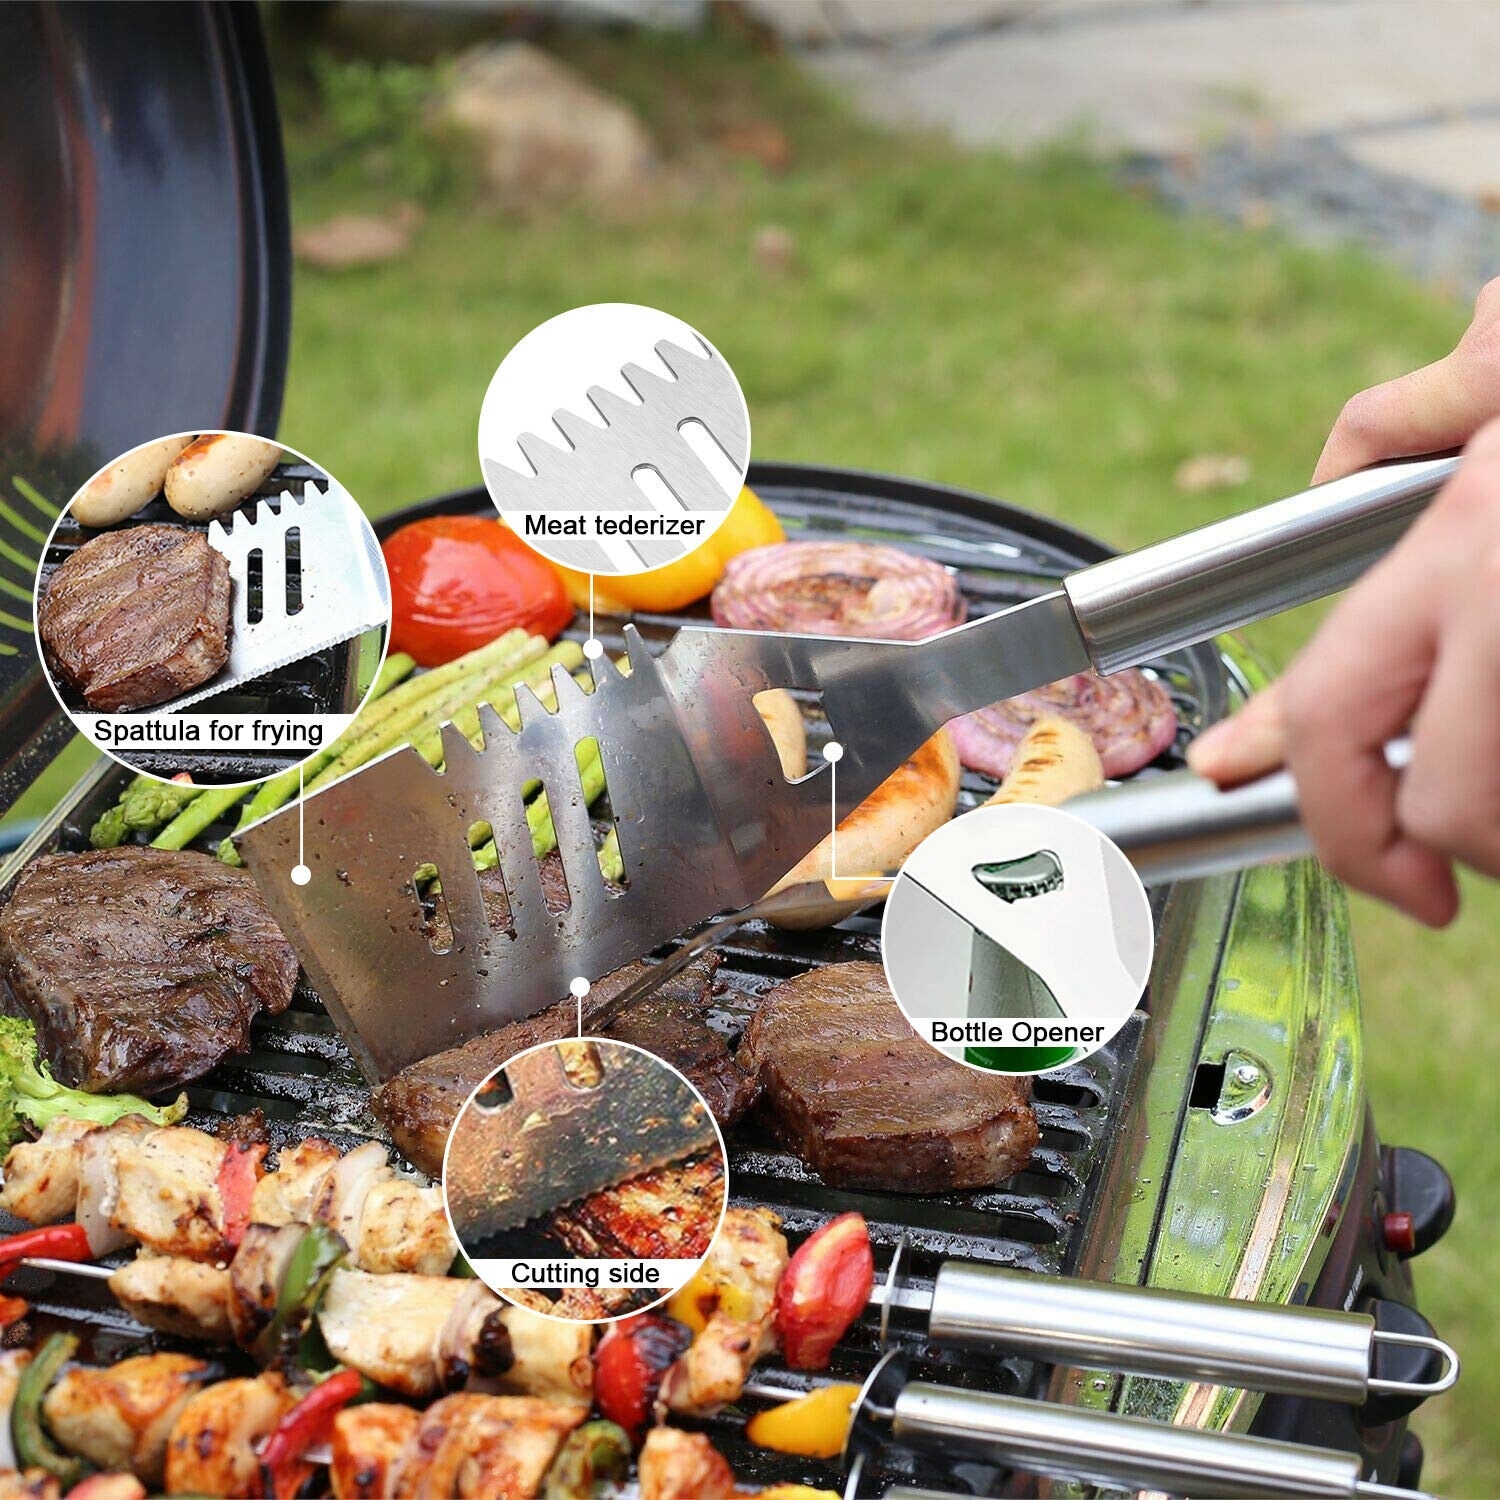 https://ak1.ostkcdn.com/images/products/is/images/direct/720d6809d57c2af490965476060293c9ed241e08/BBQ-tool-sets-%2C-BBQ-tool-Grilling-Accessories-Flat-Top-Stainless-Steel-Spatulas-Barbecue-Kit.jpg